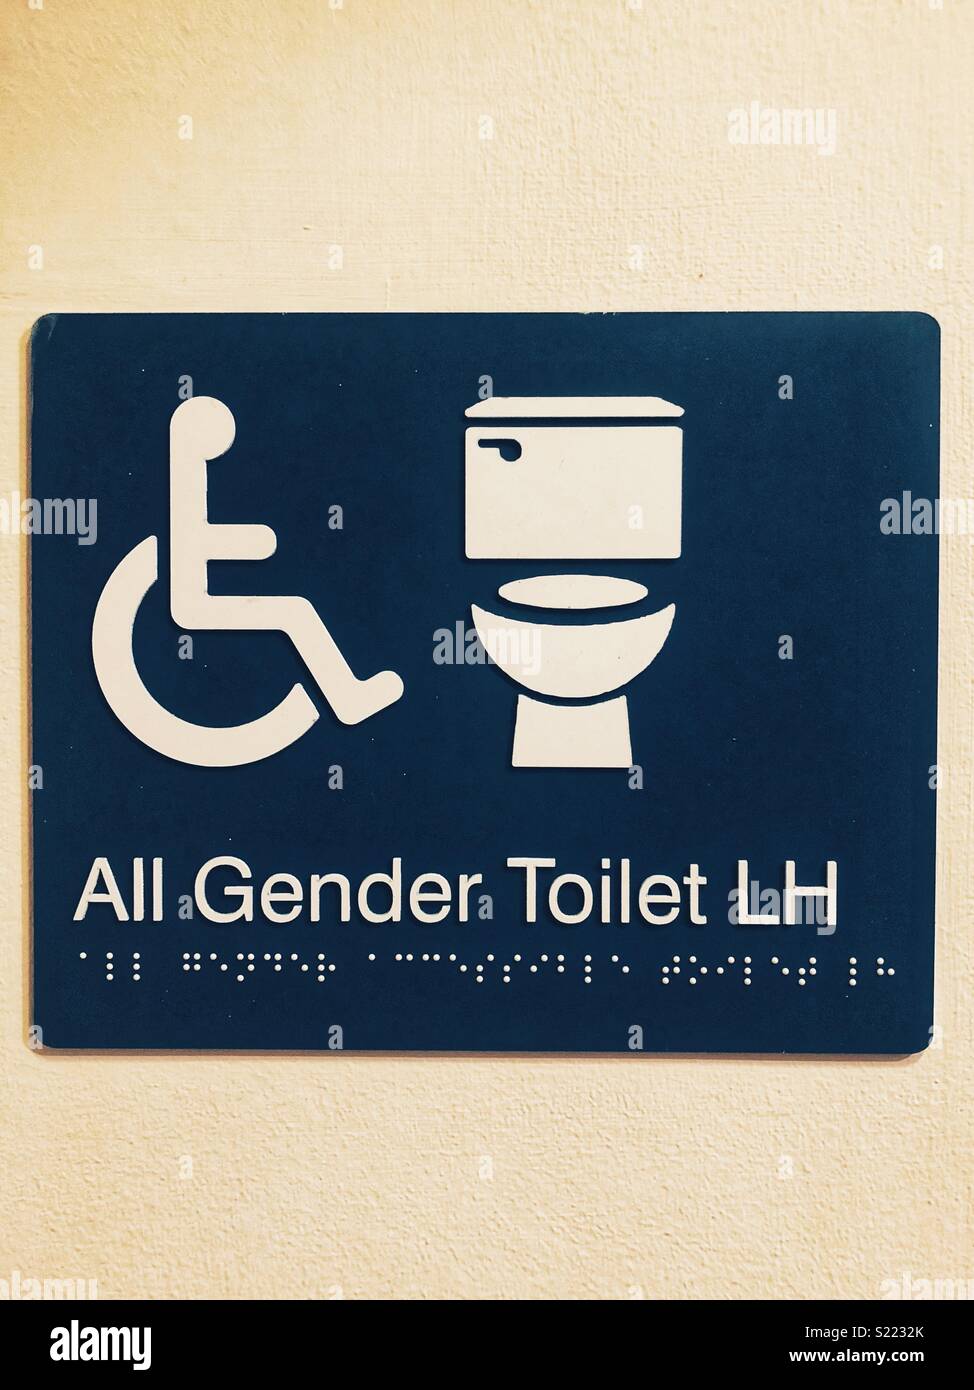 Al gender and disabled toilet Stock Photo